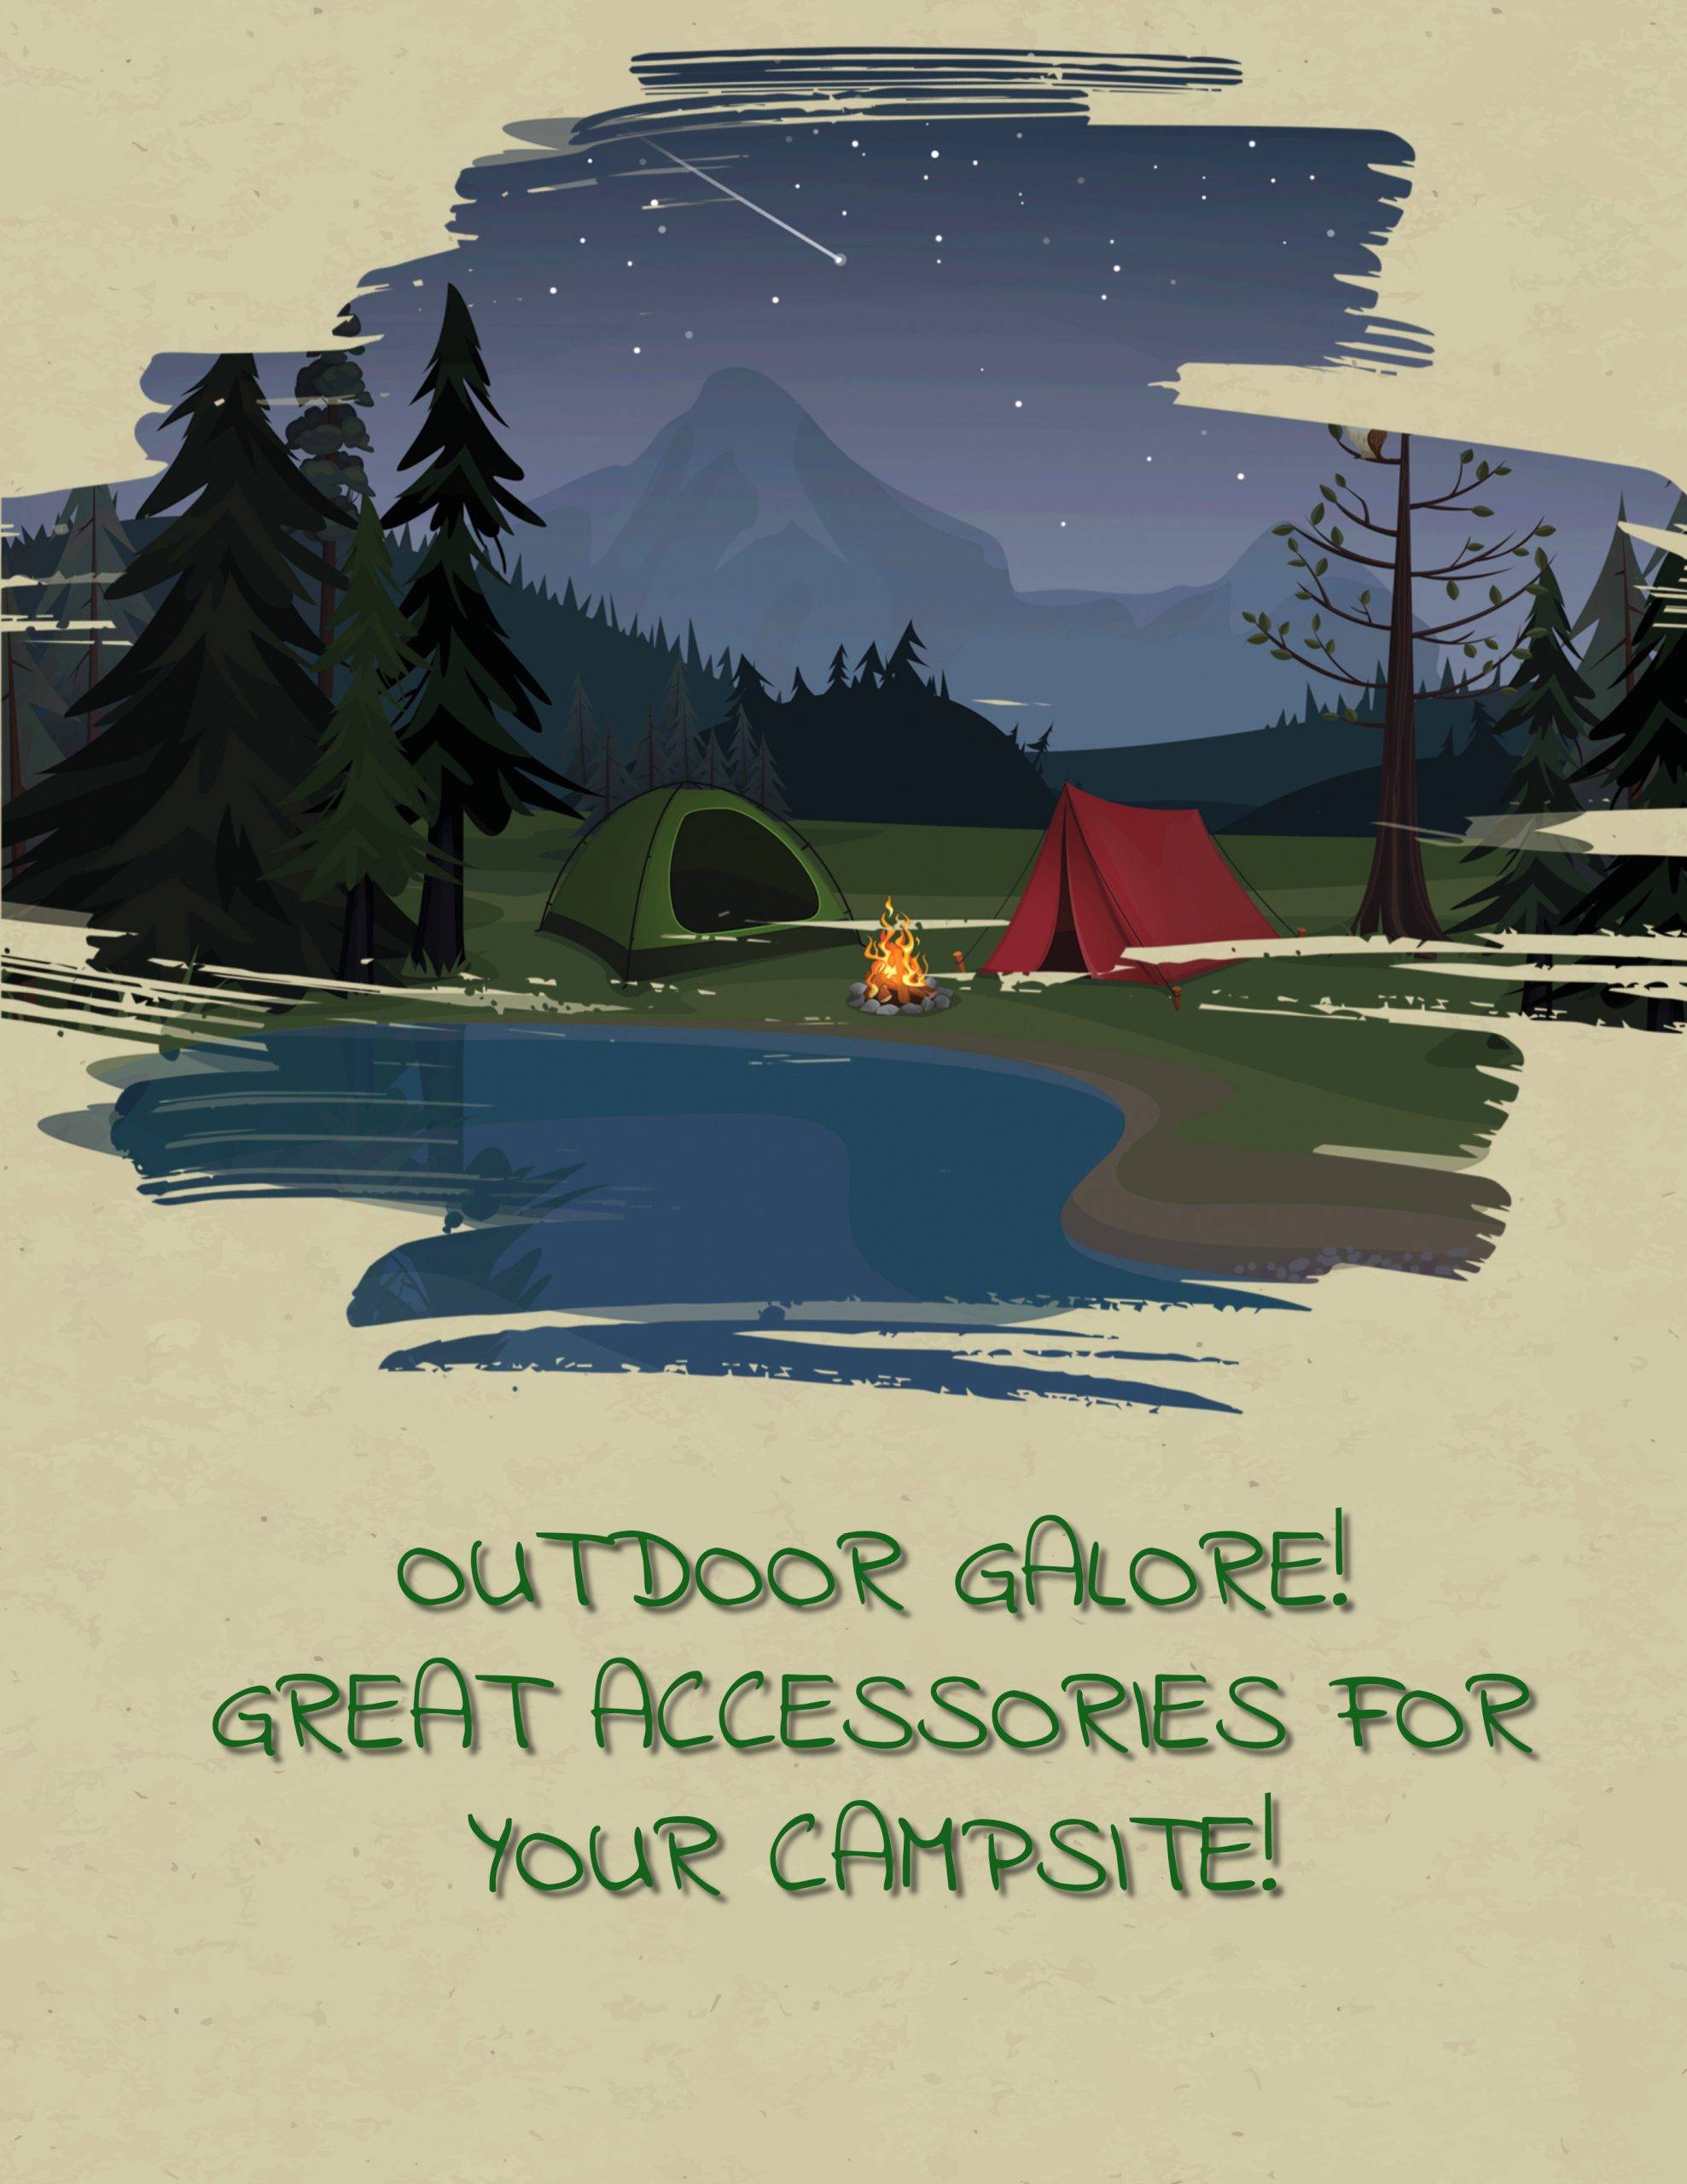 Christmas is Coming!  Accessorize YOUR Campsite!!